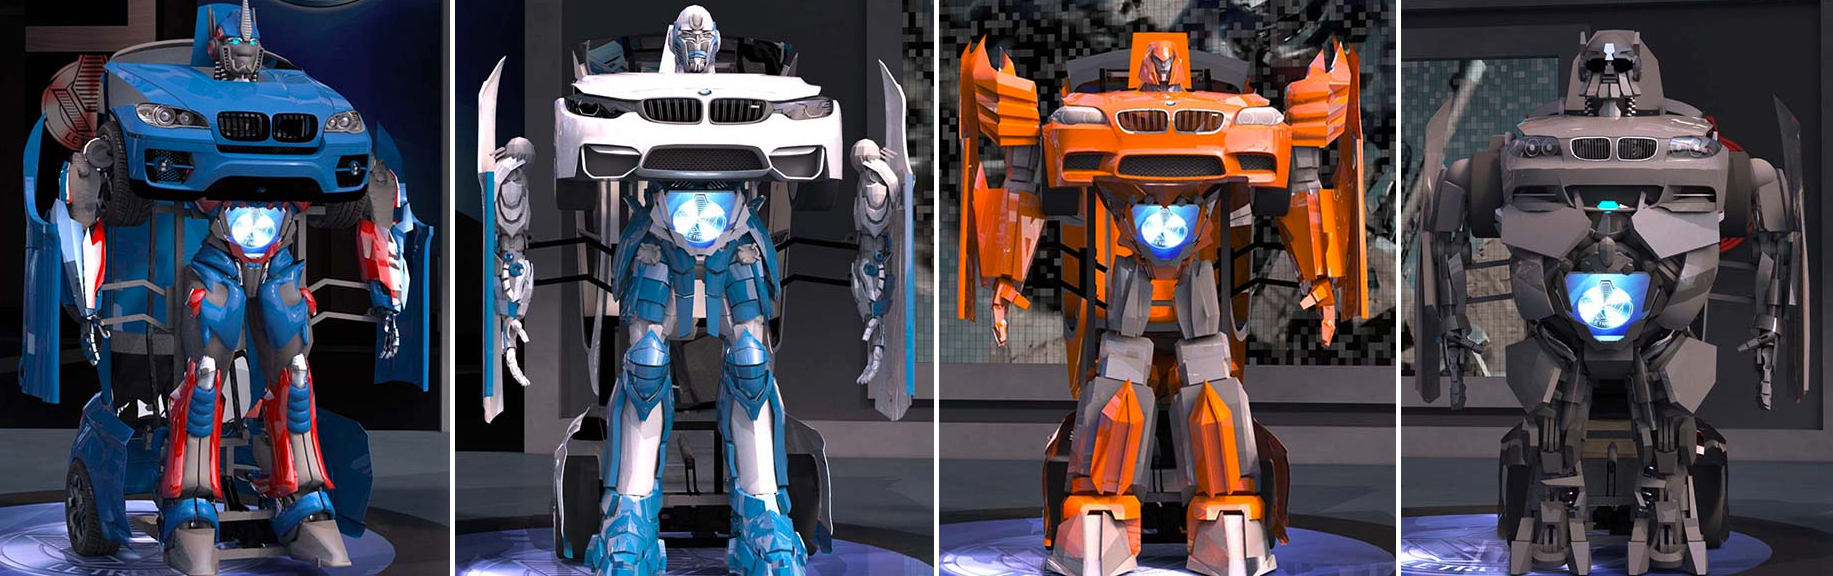 This Company Will Build You A Real-Life Transformer